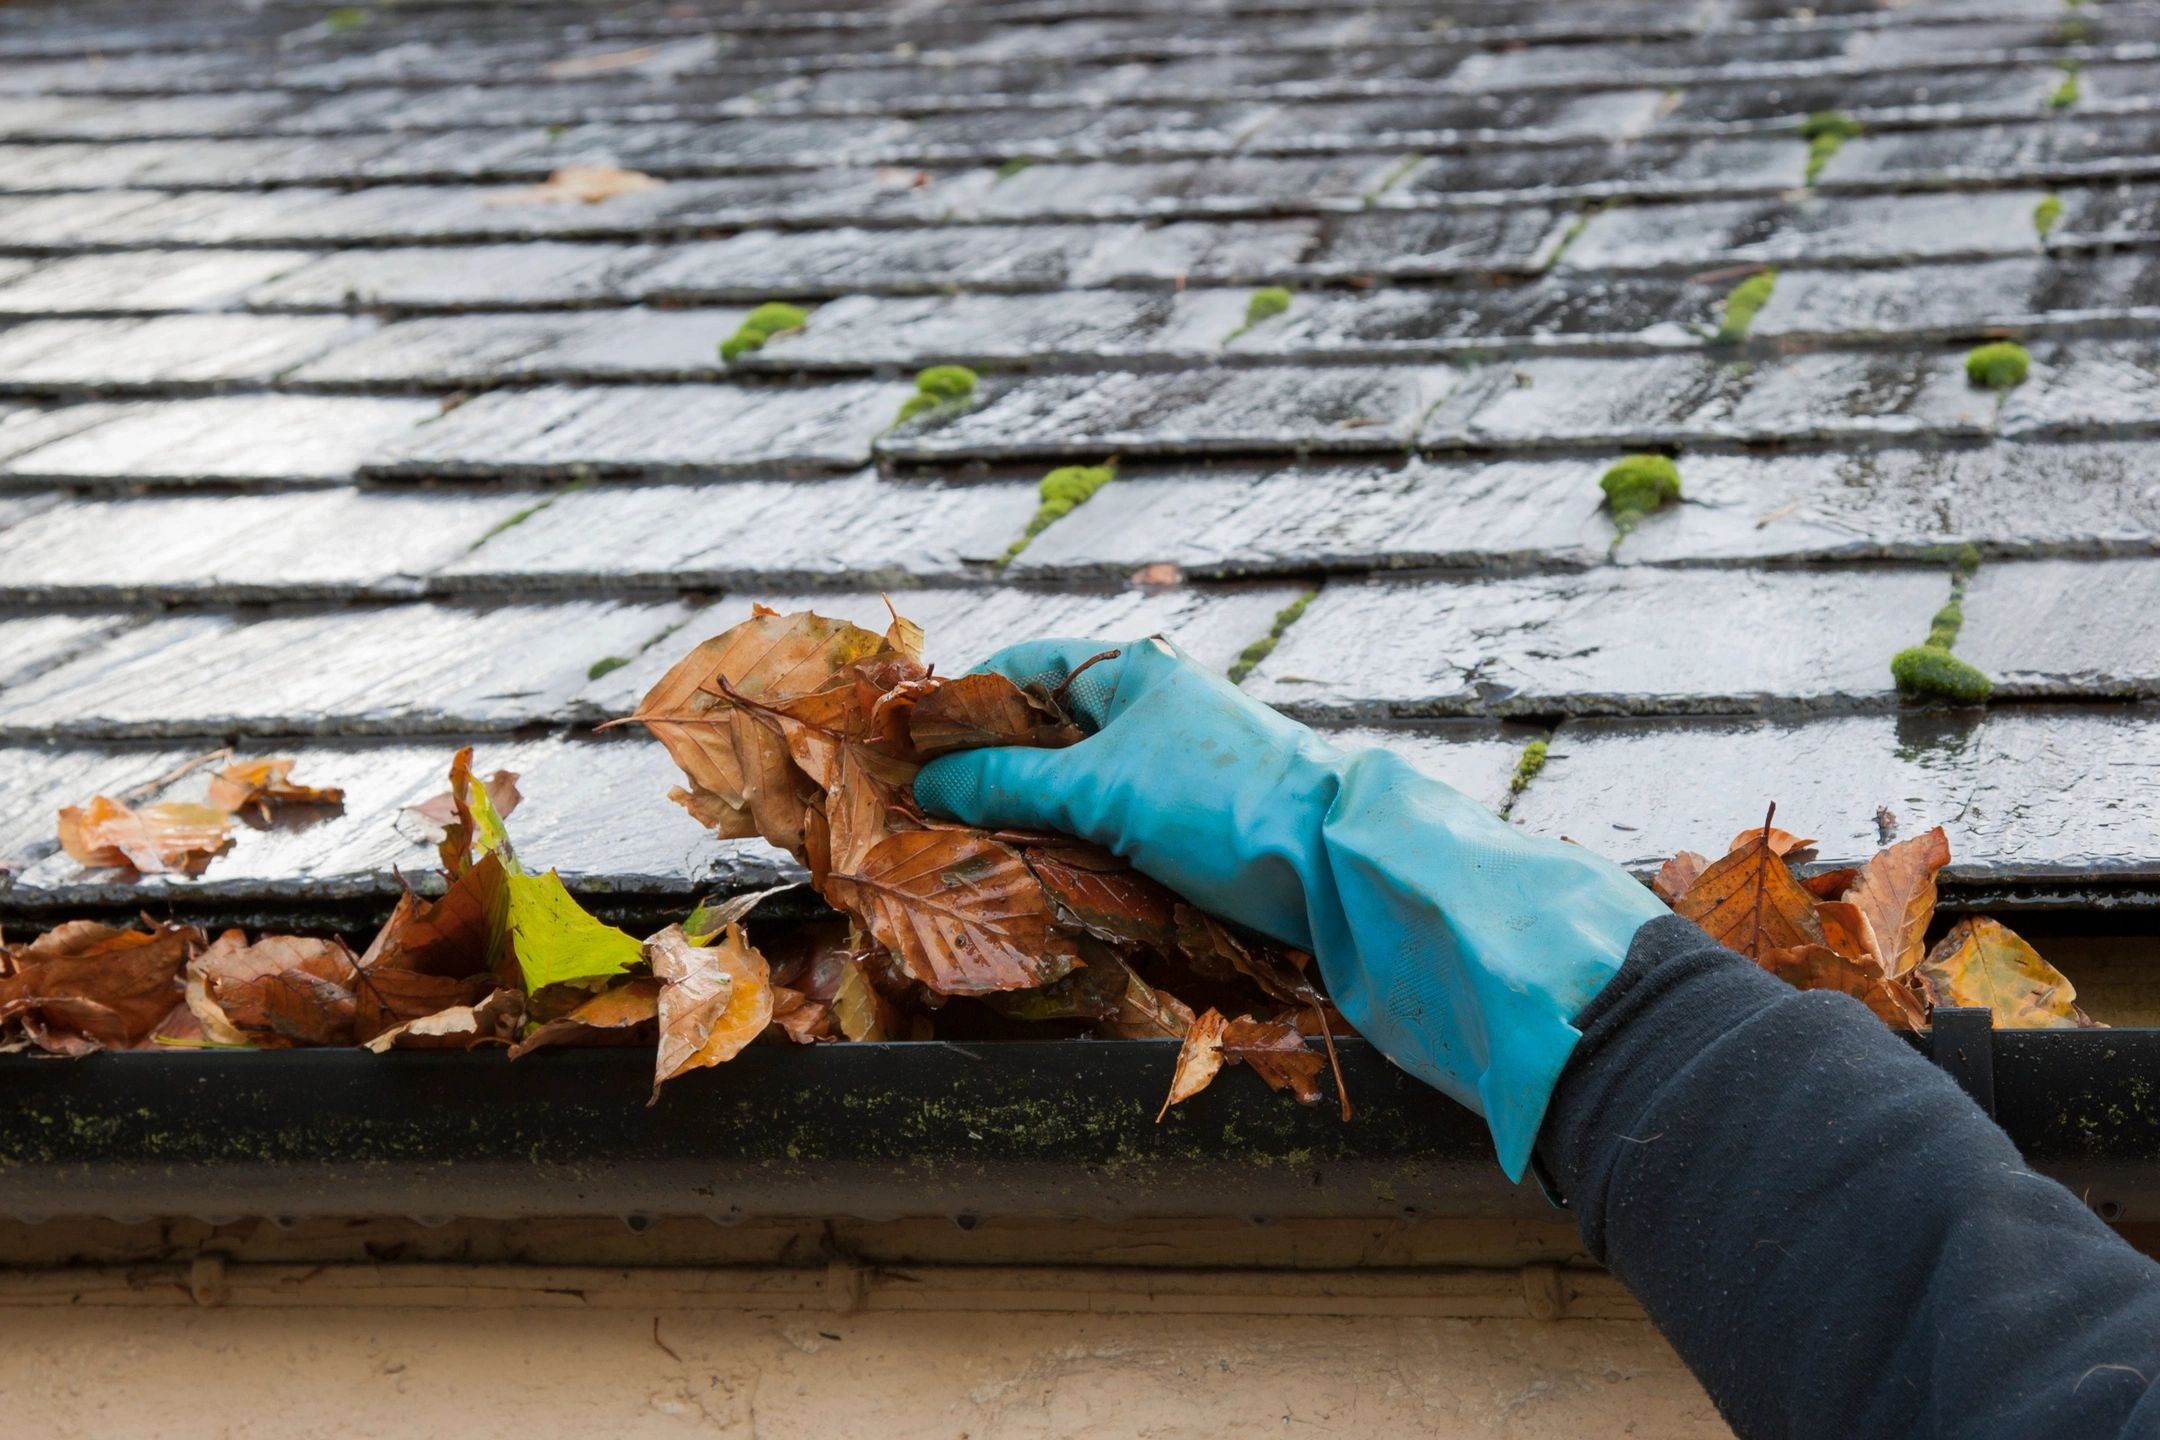 Gutter cleaning: person on ladder removes leaves & debris from rain gutter with gloved hand.